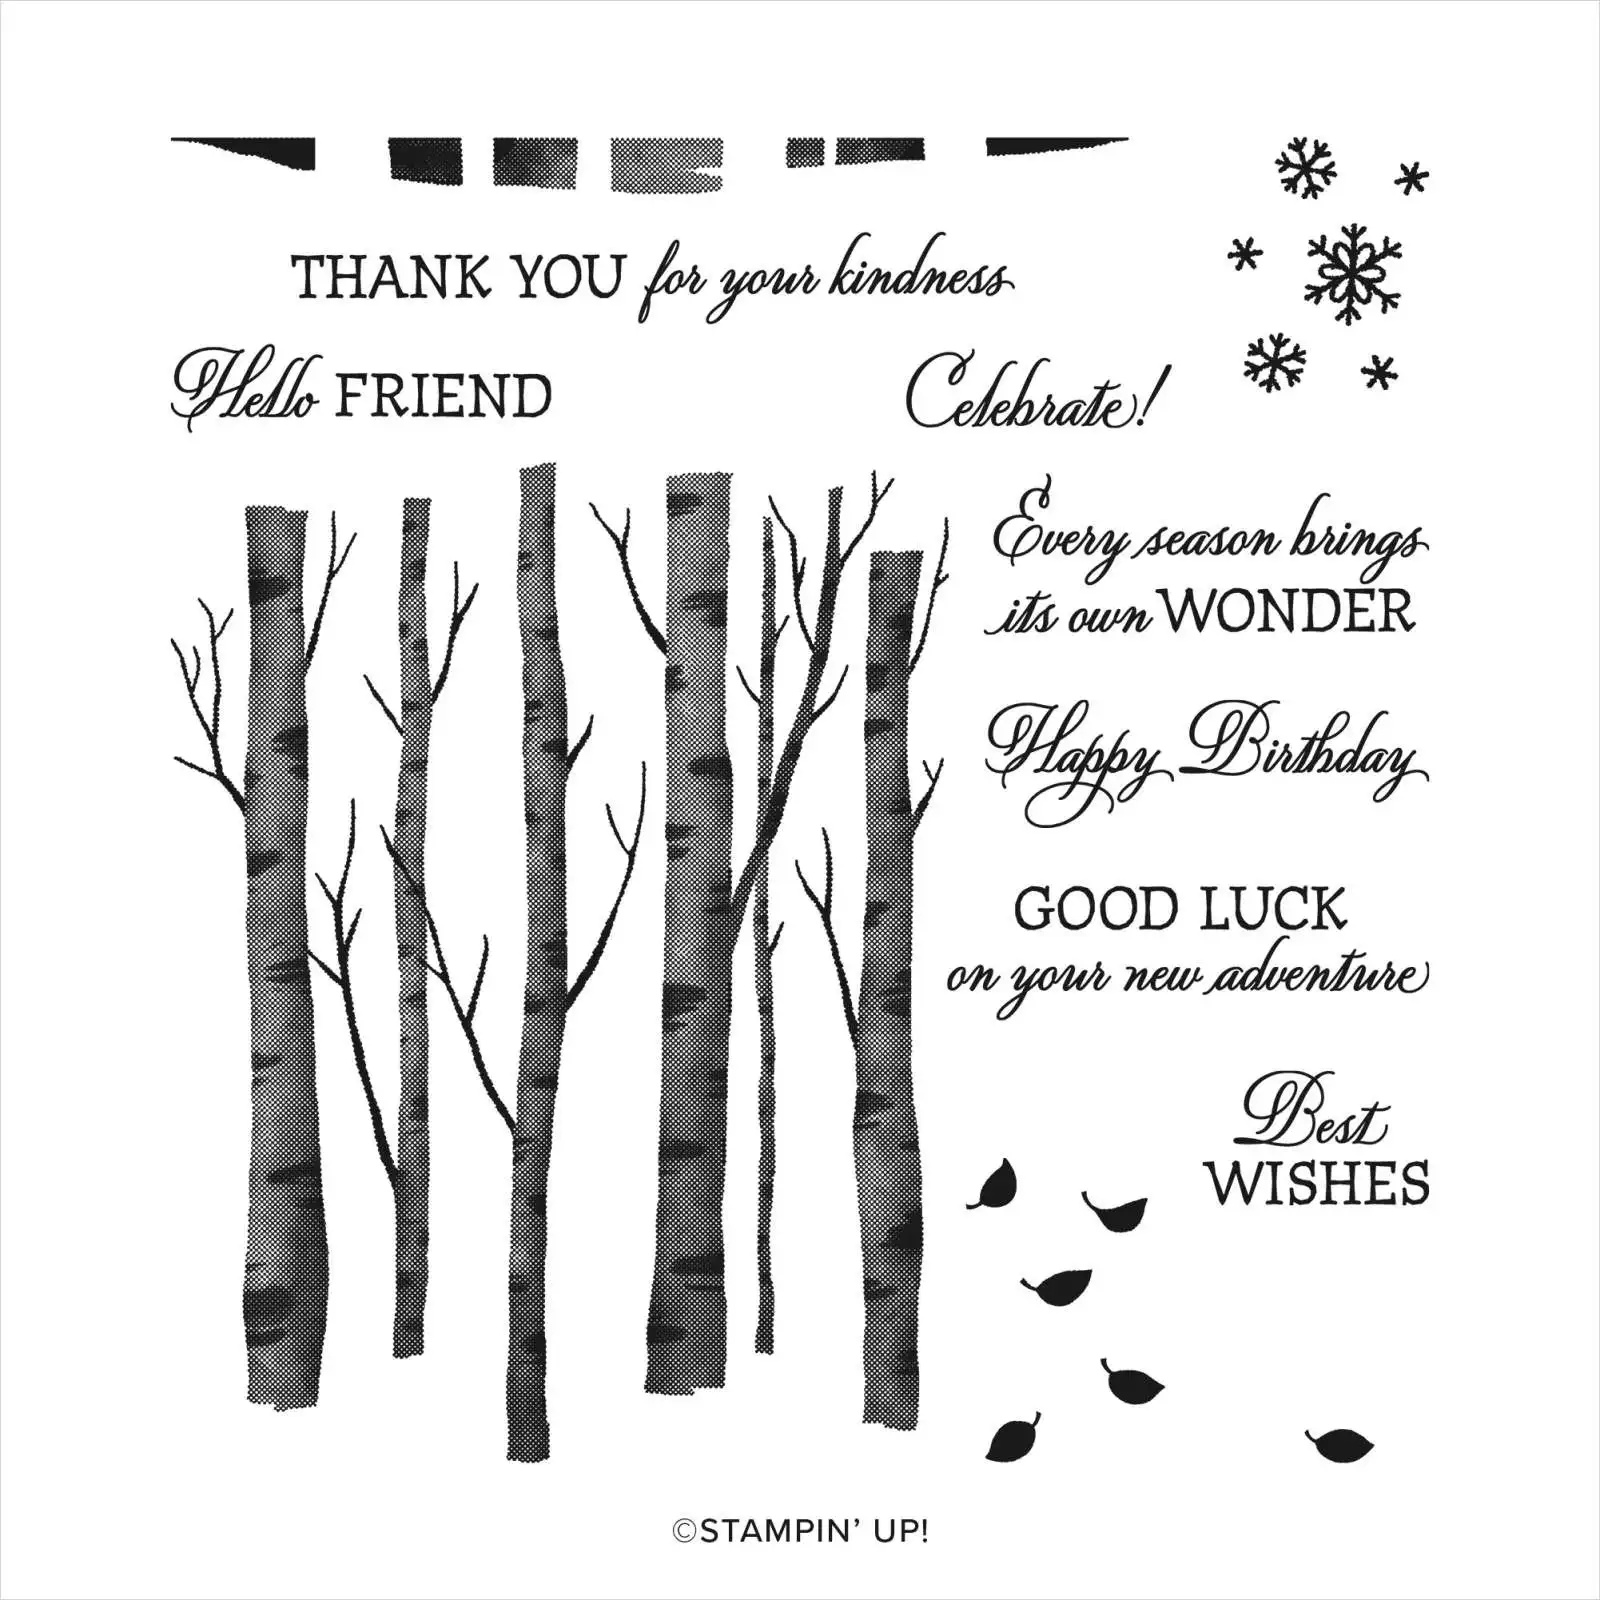 Woods Welcoming Stamps And Dies Scrapbook Diary Decoration Stencil Embossing Template Diy Greeting Card Handmade New for 2021